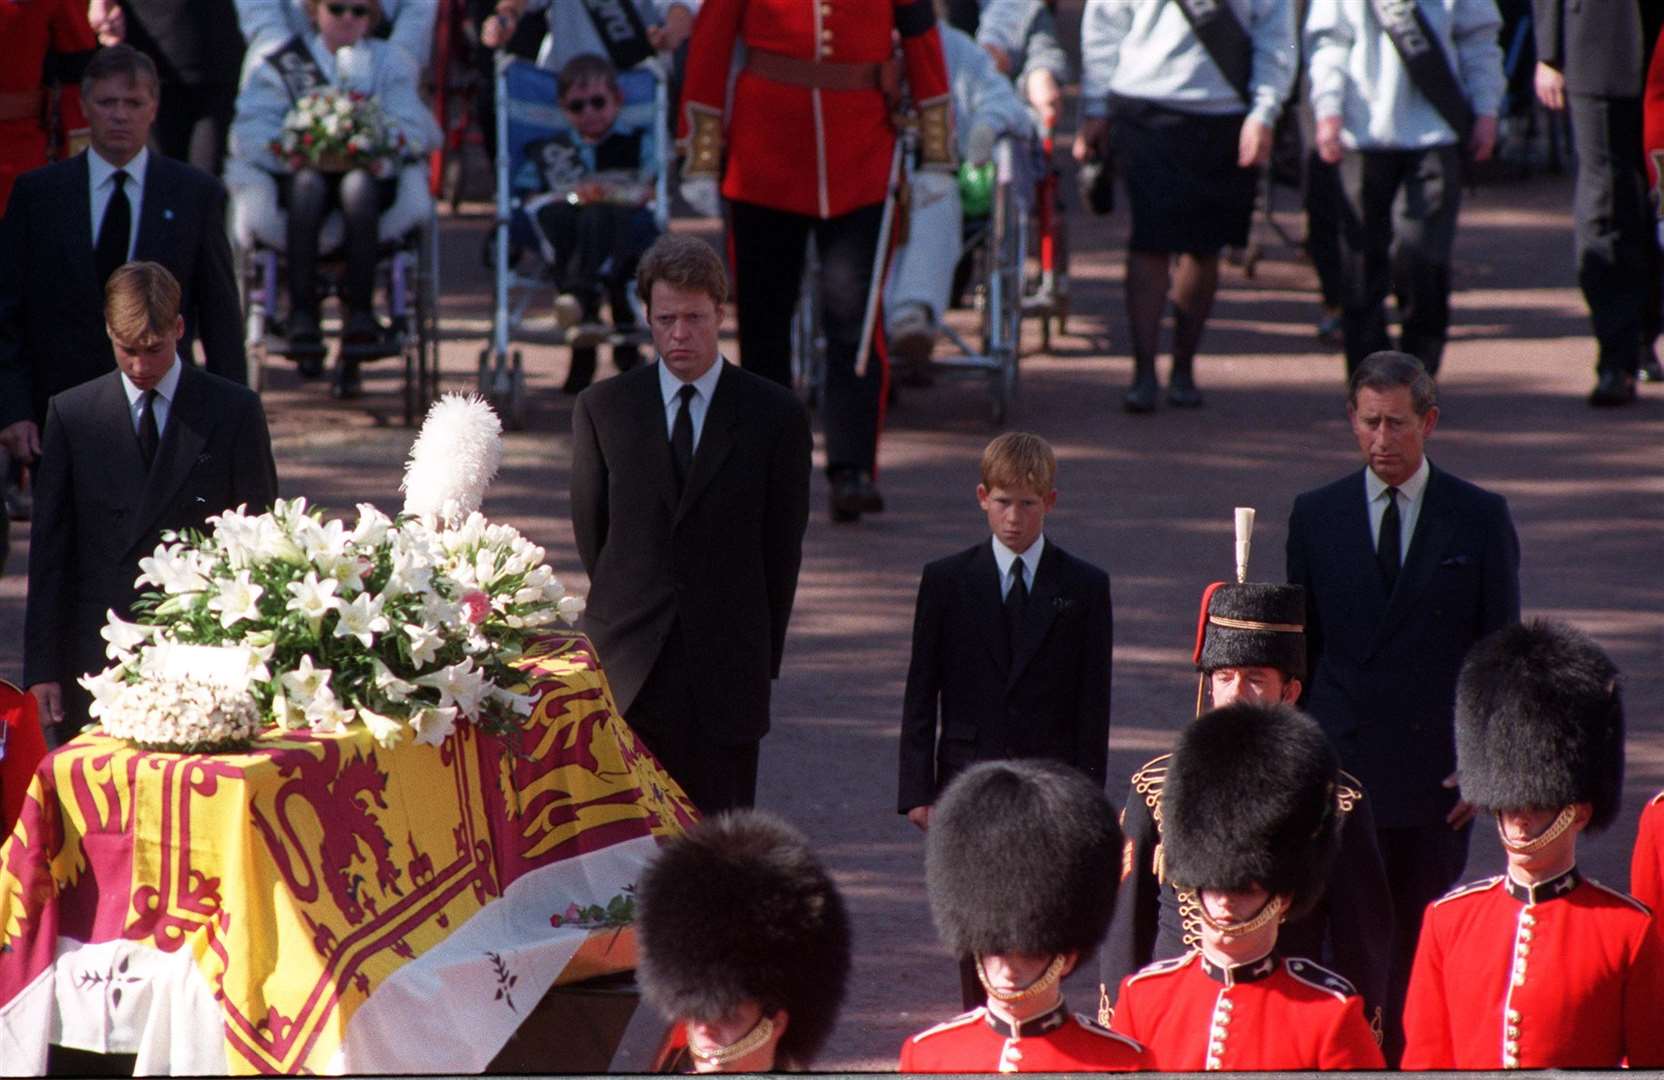 The young duke, second from right, centre, struggled with grieving in public for his mother (Adam Butler/PA)